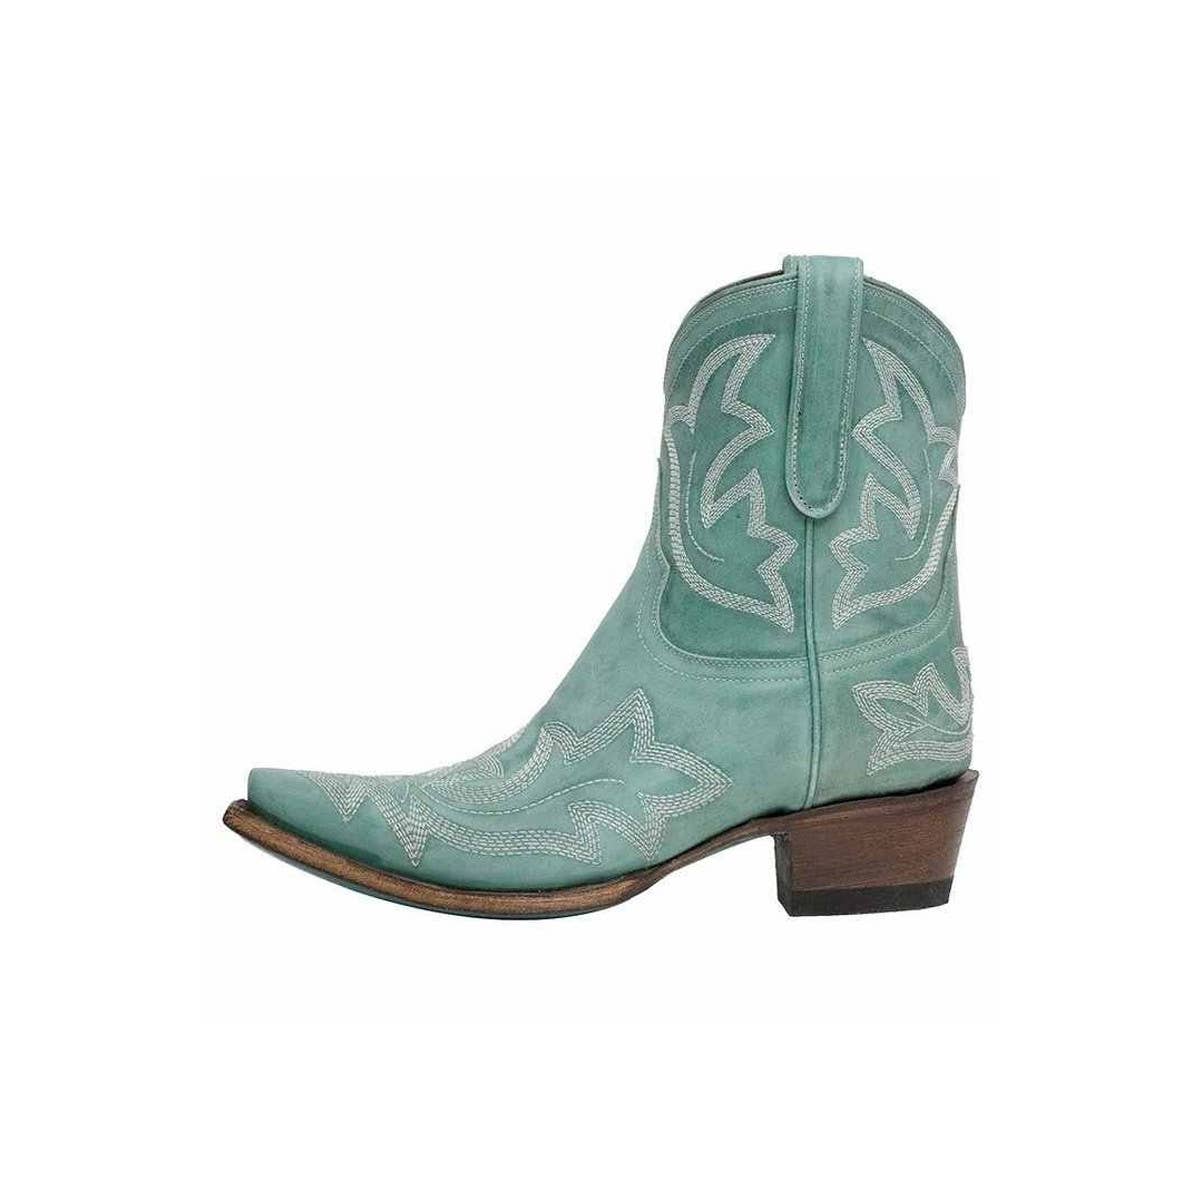 Women’s Cowboy Embroidered Low Heel Ankle Boots